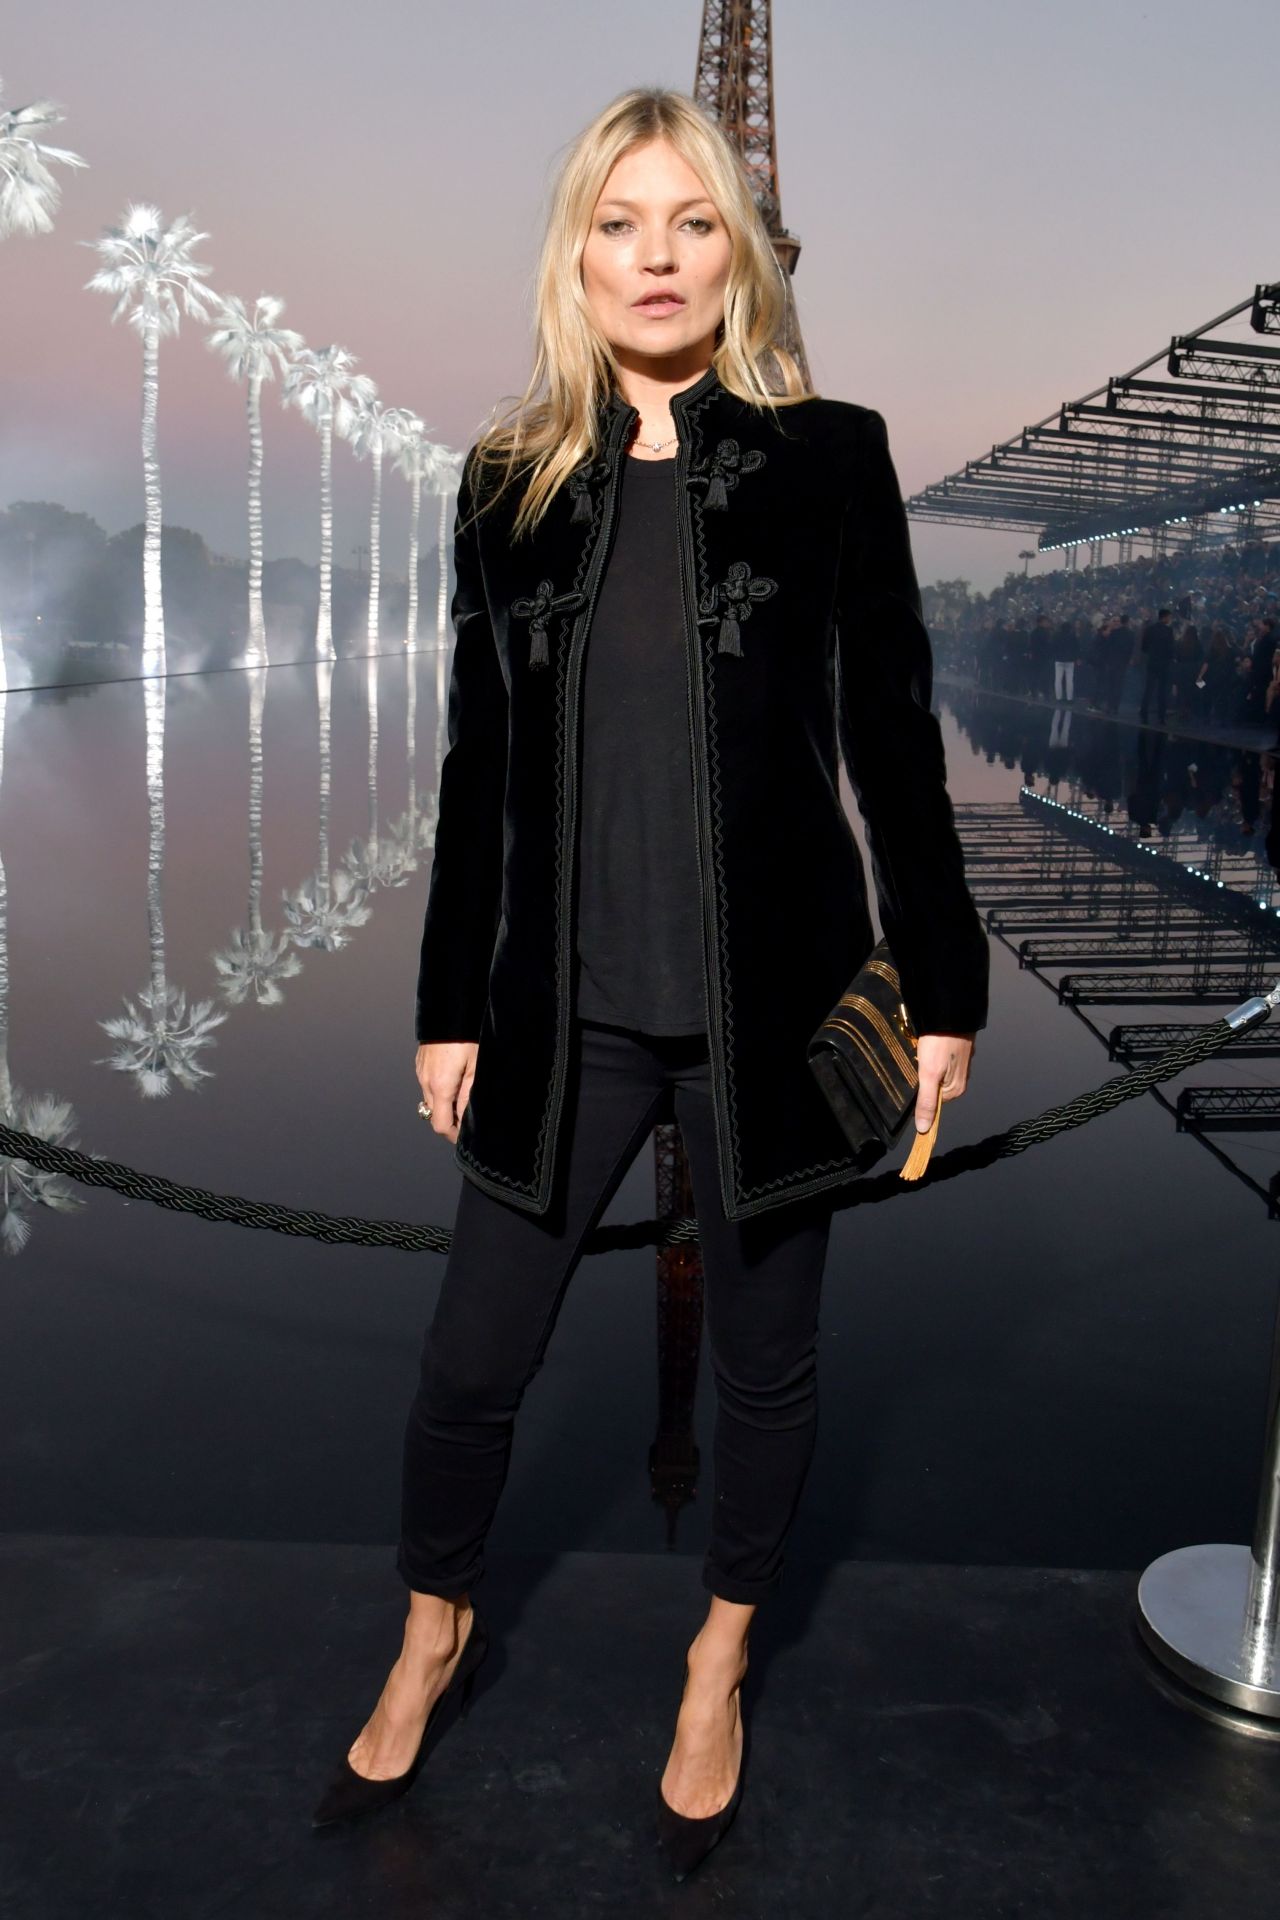 Kate Moss Steps Out With a Fresh Saint Laurent Bag Ahead of the Brand's  Fall 2018 Show